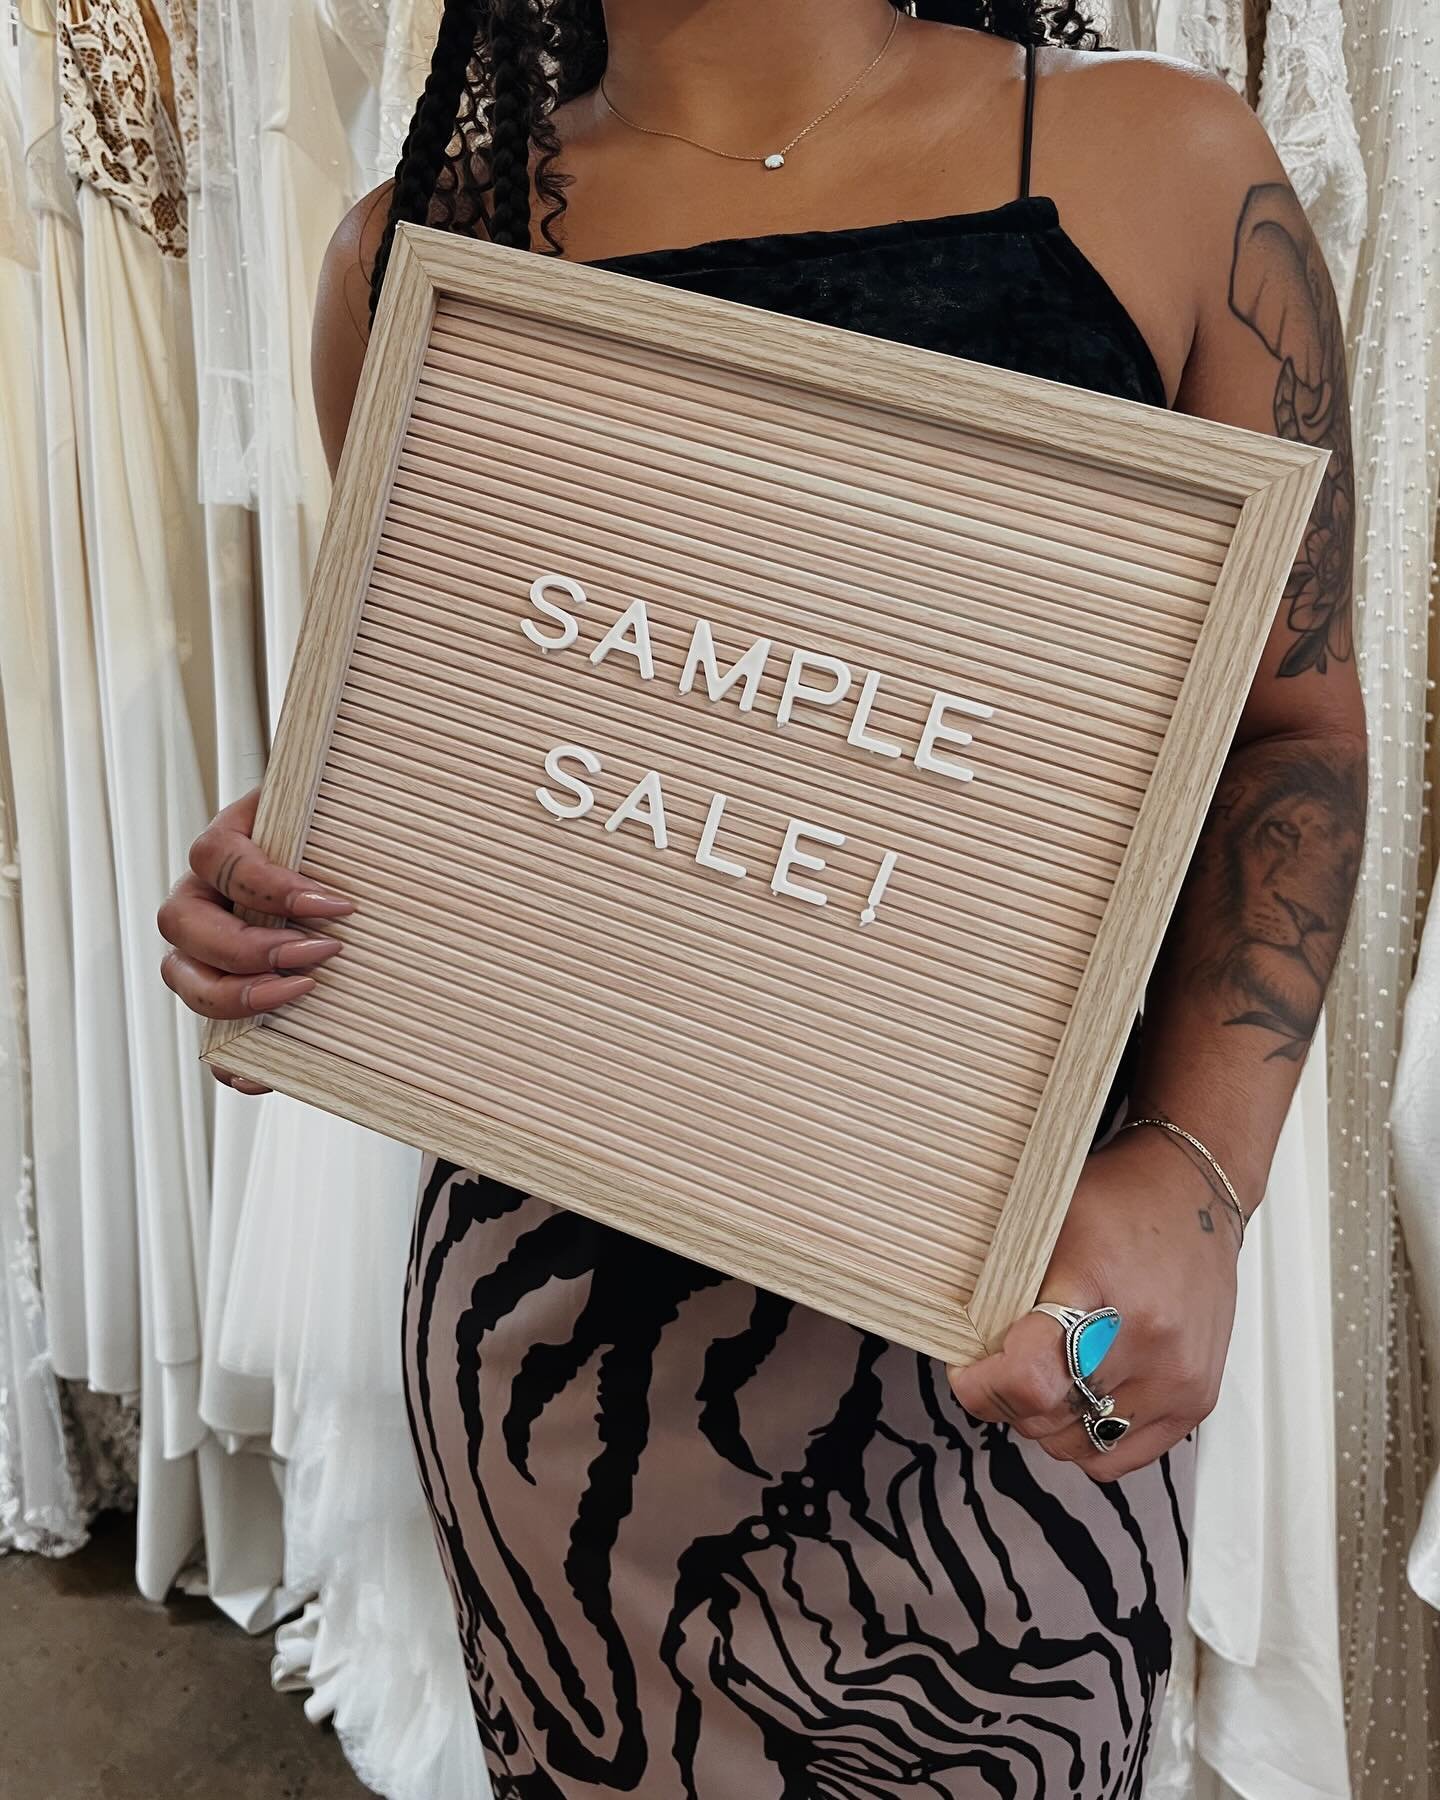 our SPRING SAMPLE SALE is in 3 days! 🥂 on may 9th across all @aandbe_bridalshop locations, a large selection of our inventory will be marked down 30-70% off for one day only &amp; lucky for you, we still have appointments available! head online to s